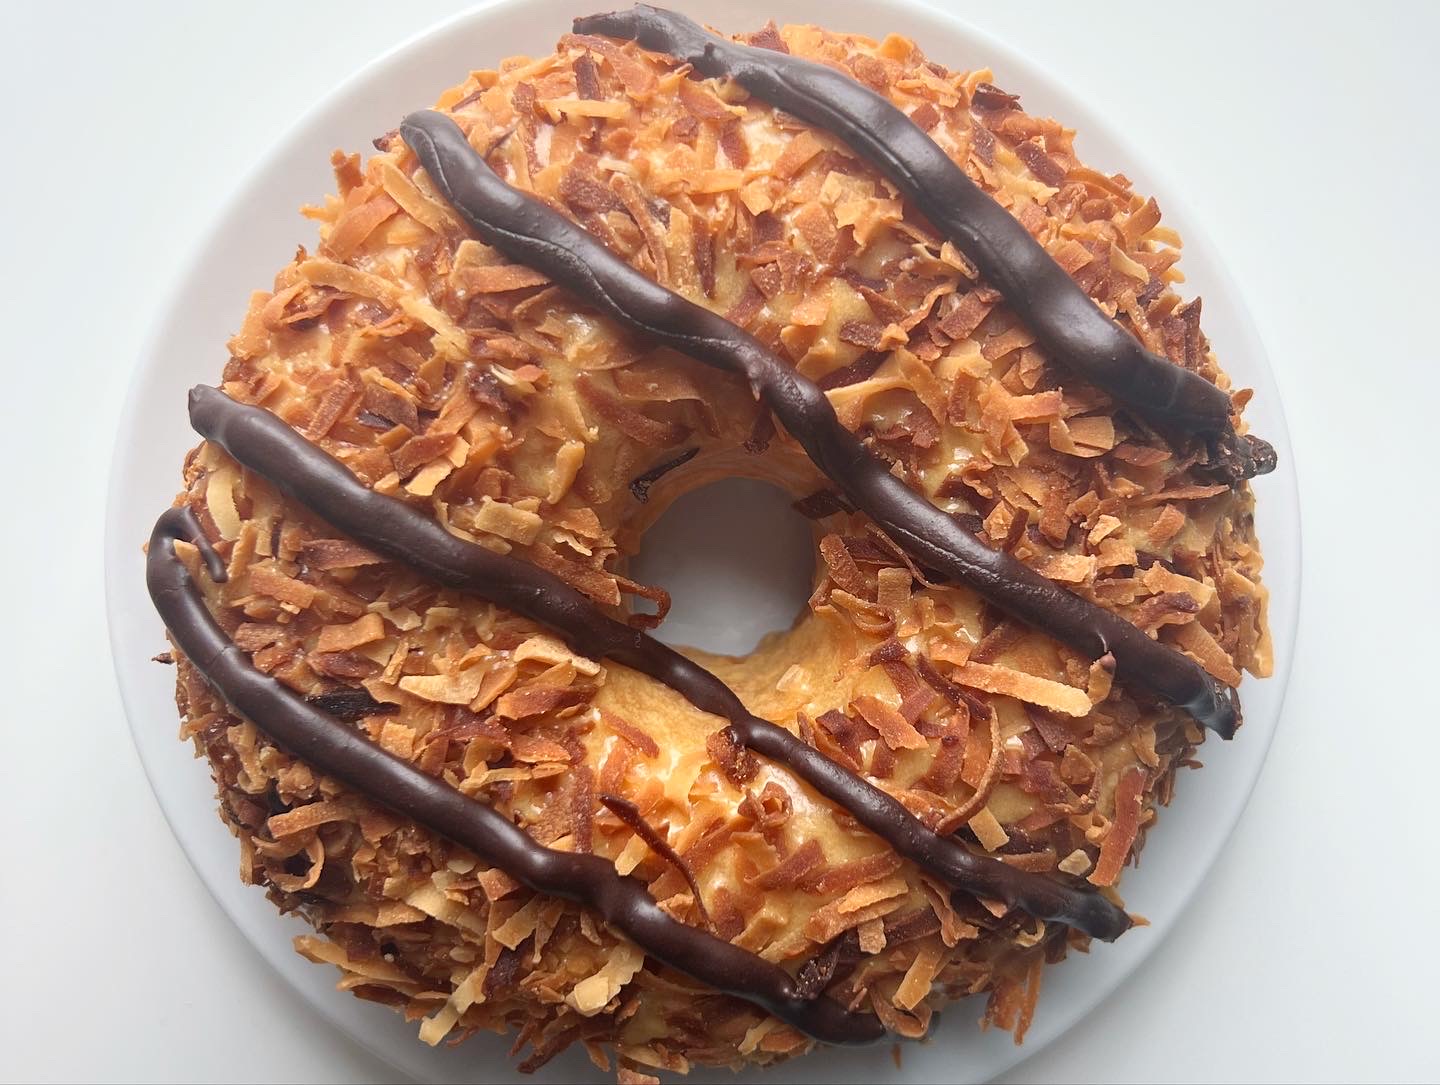 On a white plate on a white table, there is a Girl Scout Samoa cookie-inspired yeast donut with toasted coconut and chocolate drizzle, just like the cookie. Photo by Alyssa Buckley.